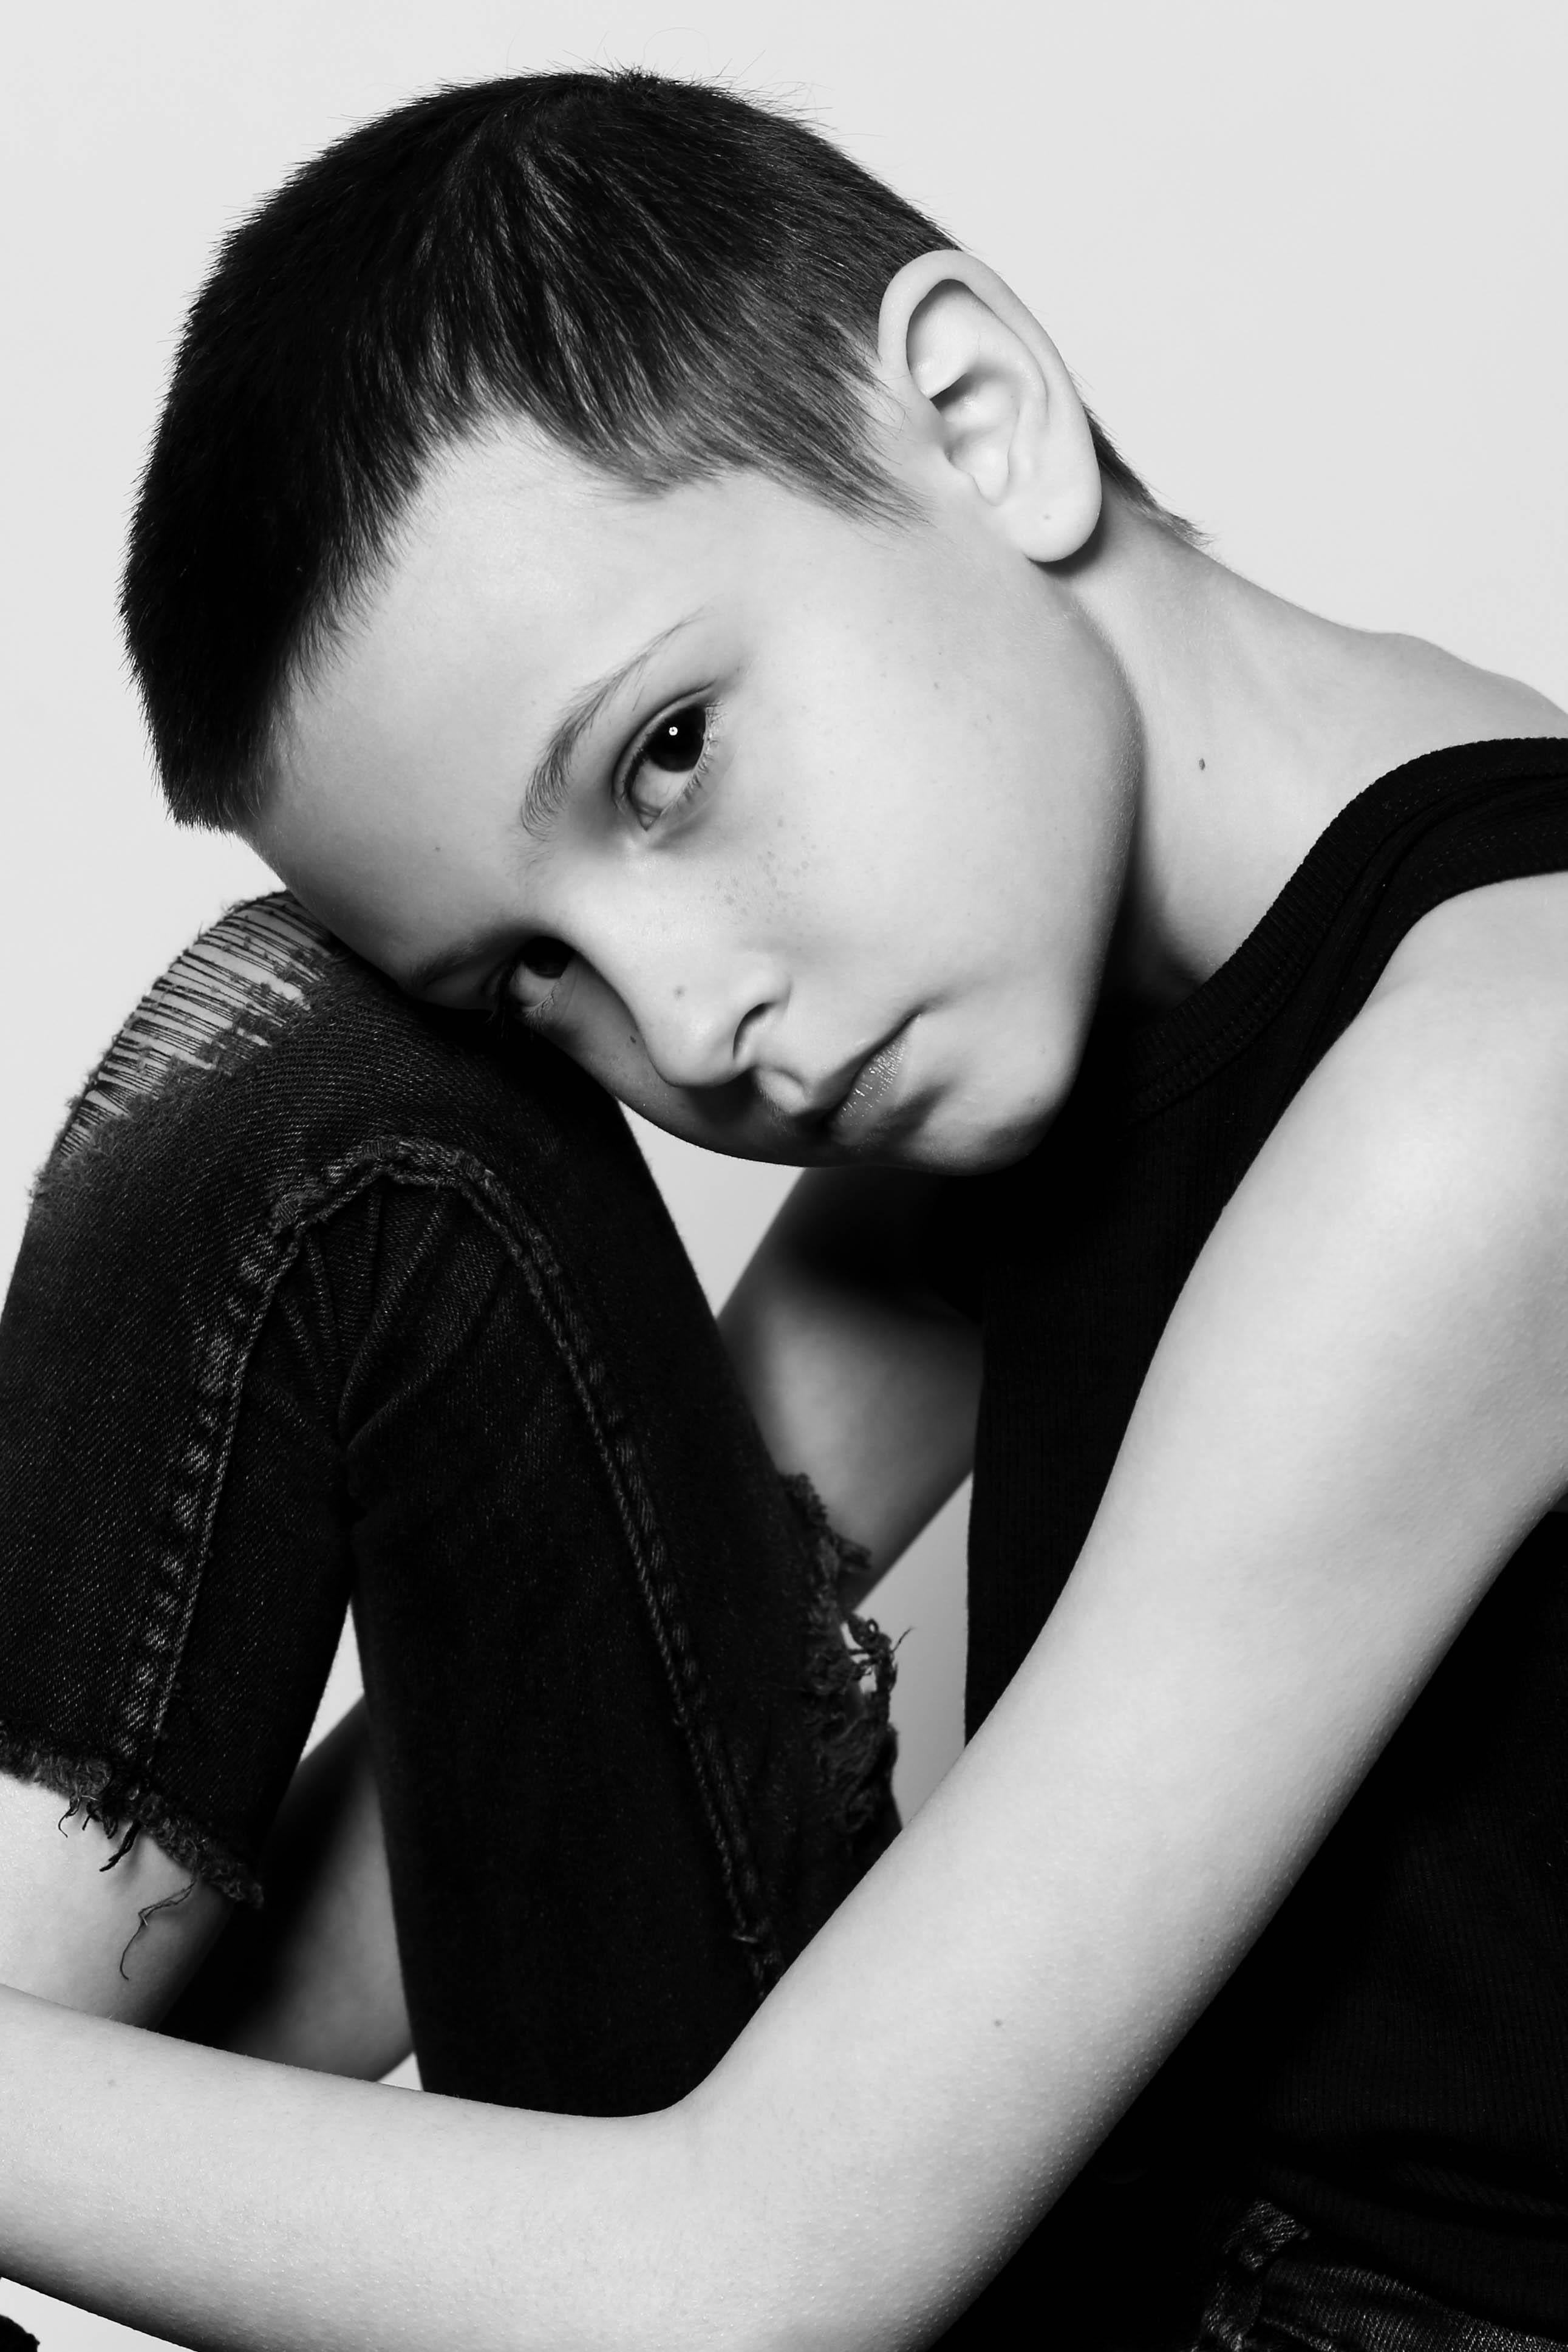 Martie Blair's photoshoot with a trimmed hair for her role as Eleven